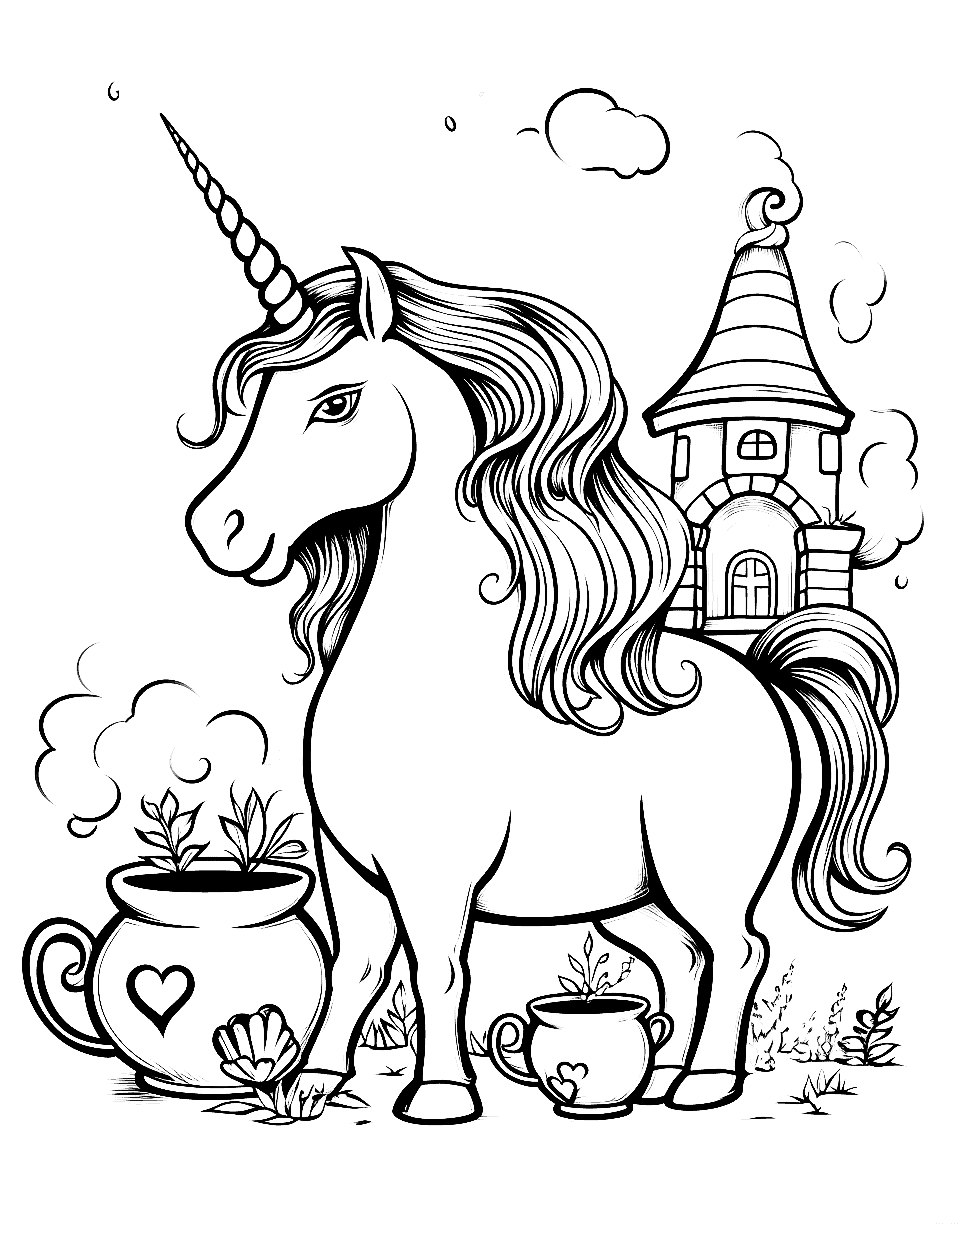 Unicorn coloring pages free printable sheets